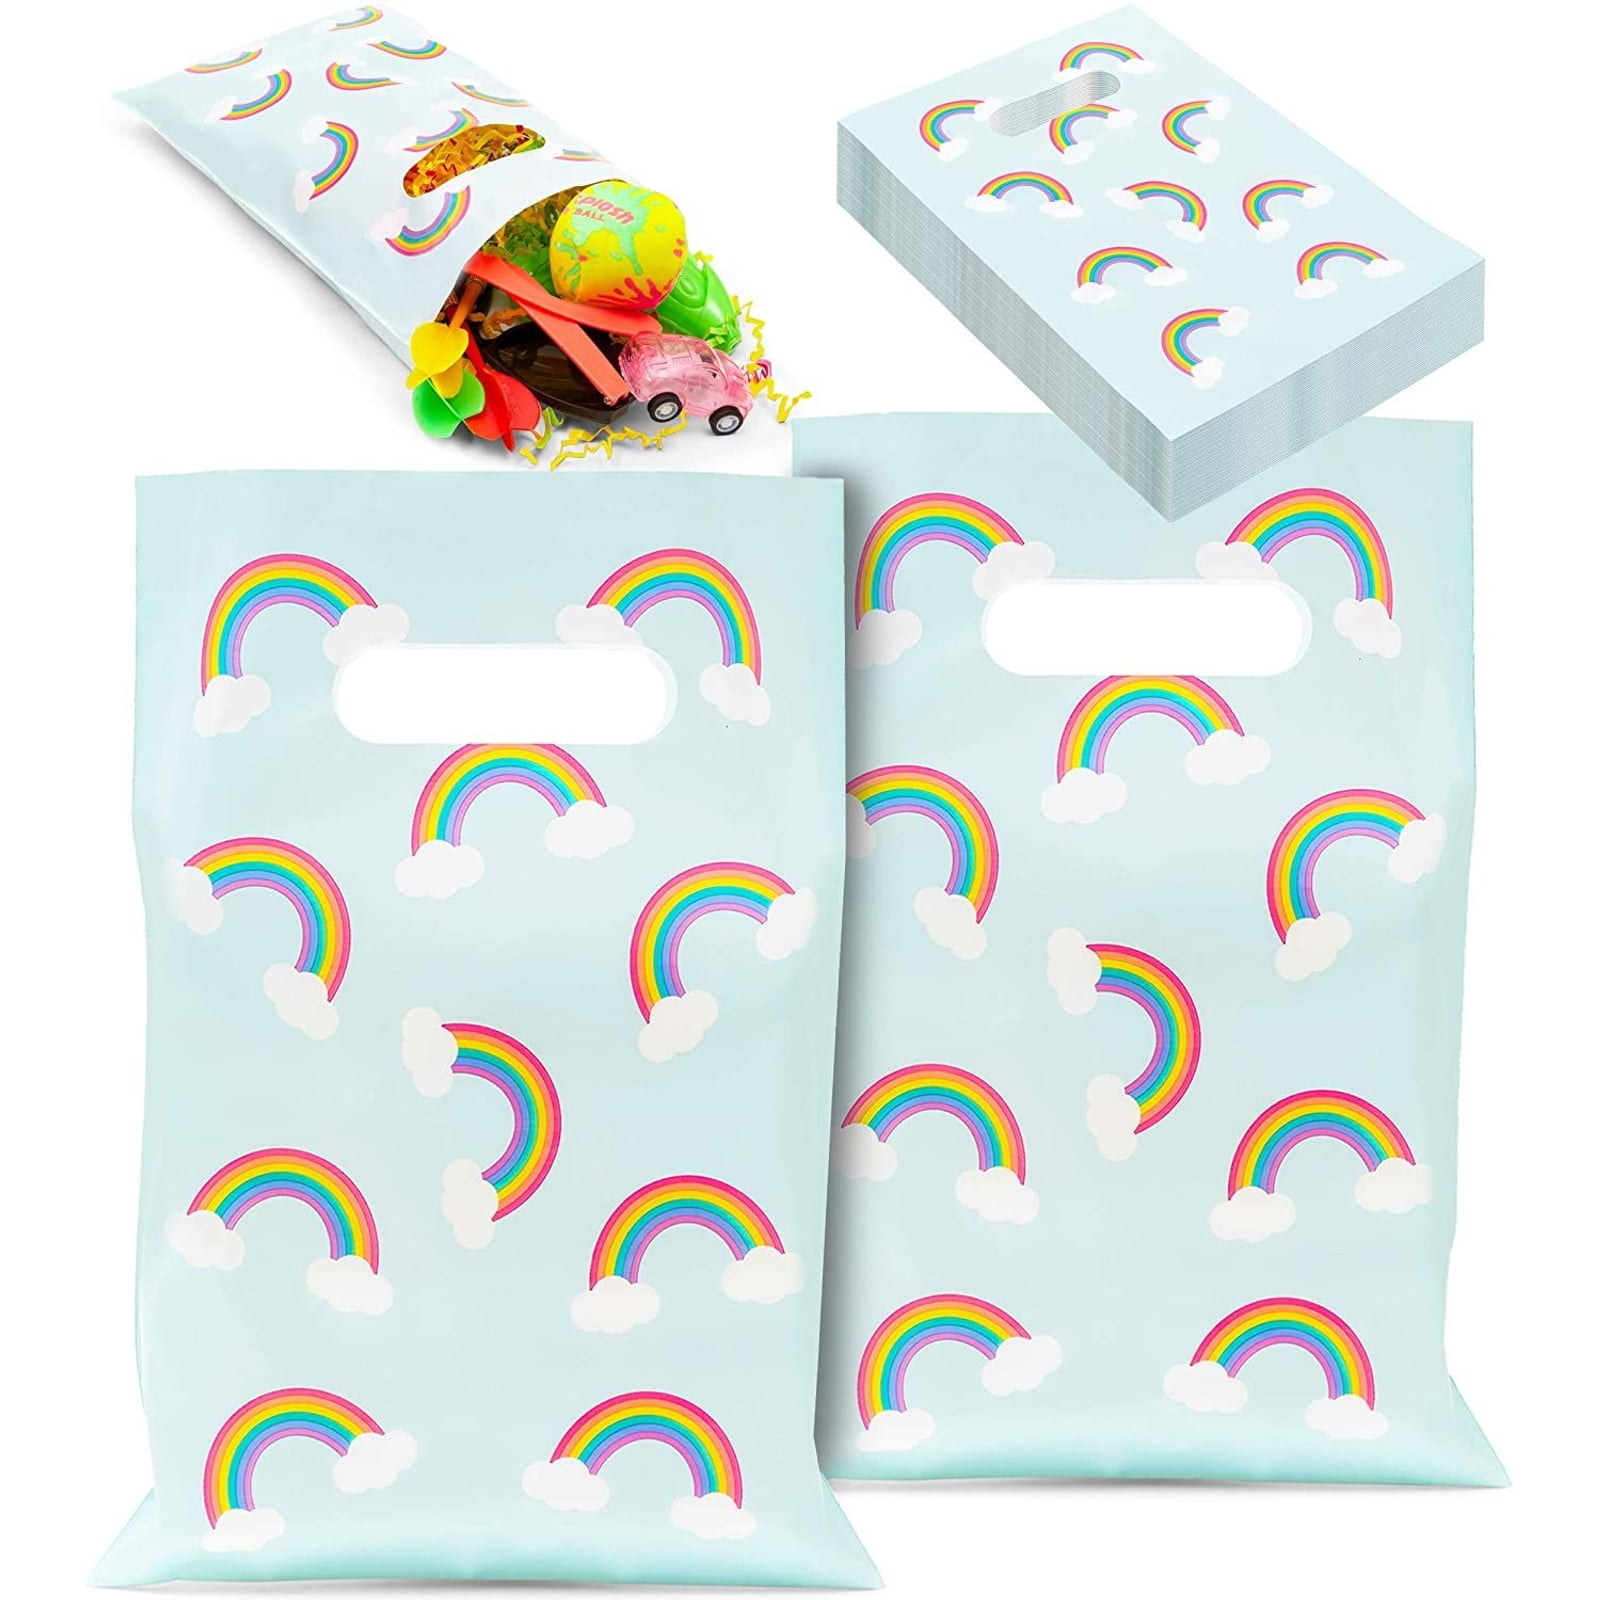 15-Pack Rainbow Gift Bags with Handles and 20 White Tissue Paper Sheets,  Medium-Size Goodie Bags For Baby Shower, Birthday Party Favors (8x9x4 in,  Blue, Kraft Paper) 